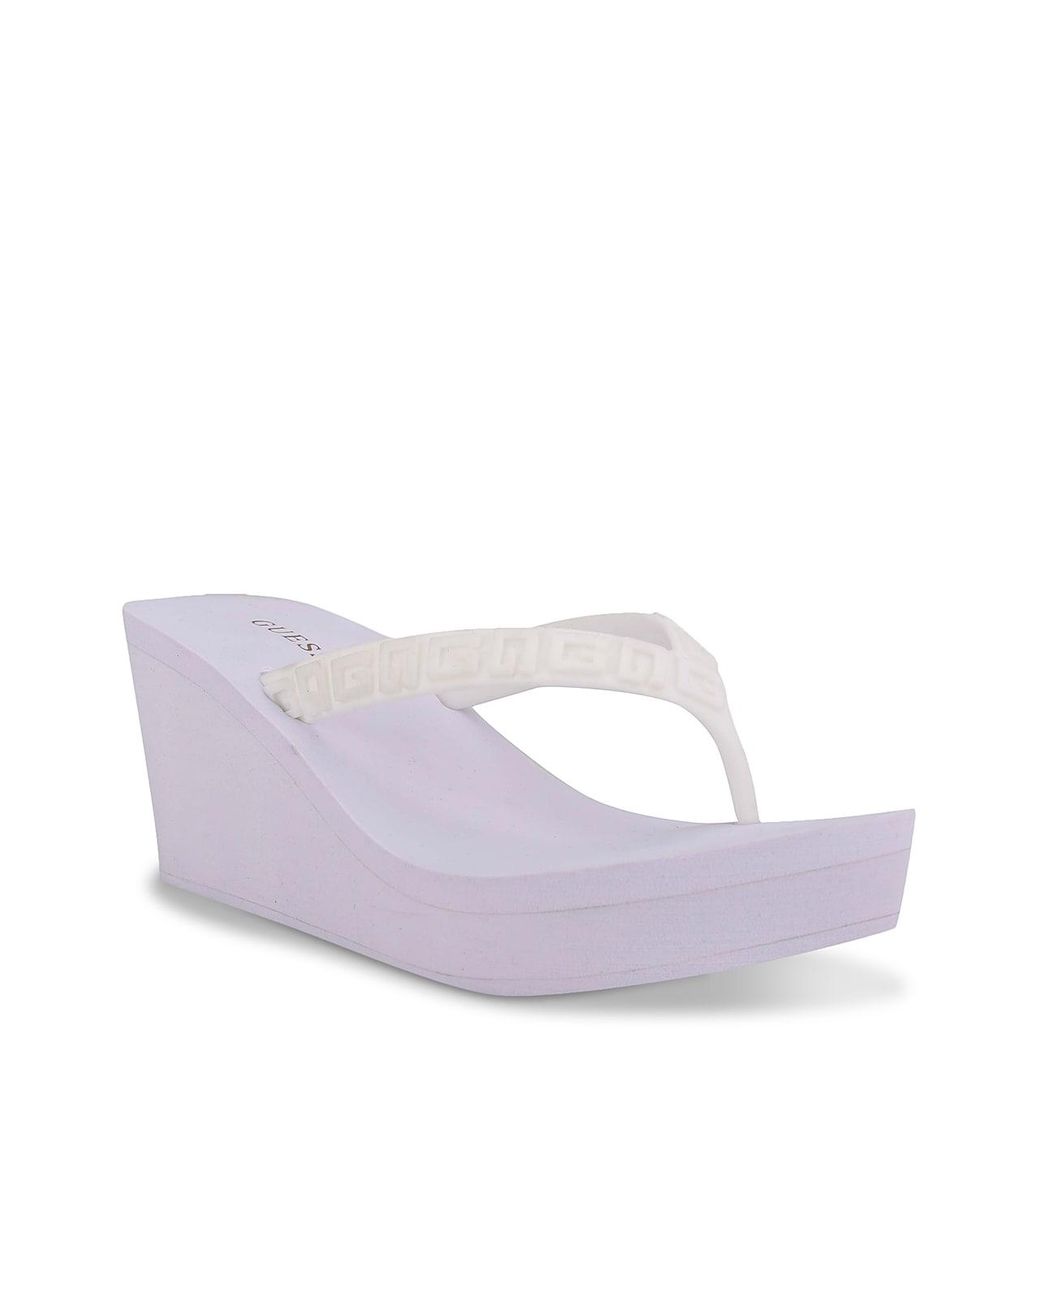 Guess Synthetic Surri Wedge Flip Flop in White | Lyst